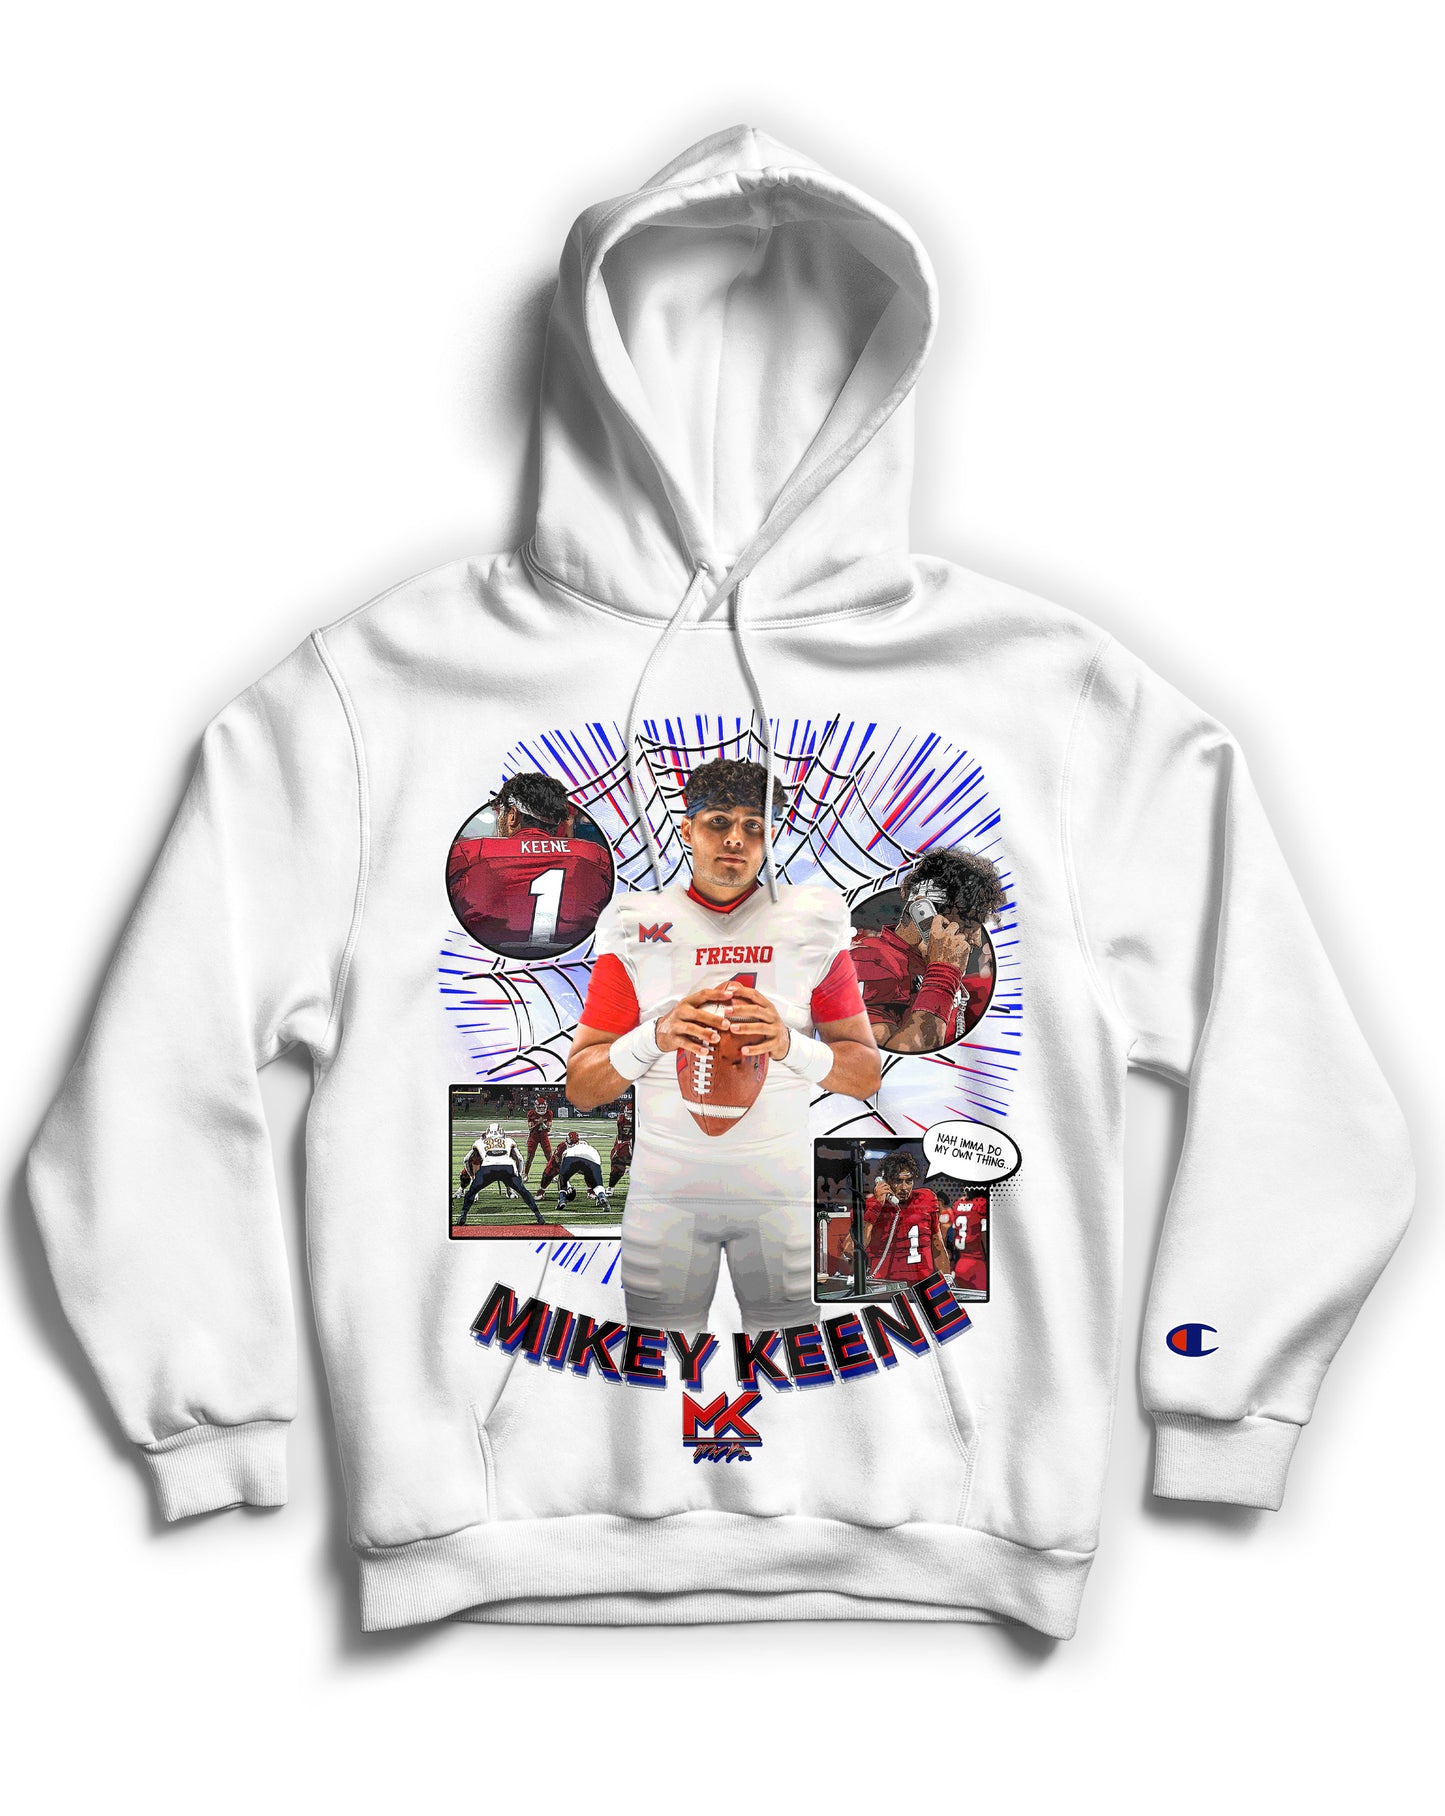 Mikey Keene “Mikey-Verse” Tribute Hoodie *LIMITED EDITION* (Black & White)